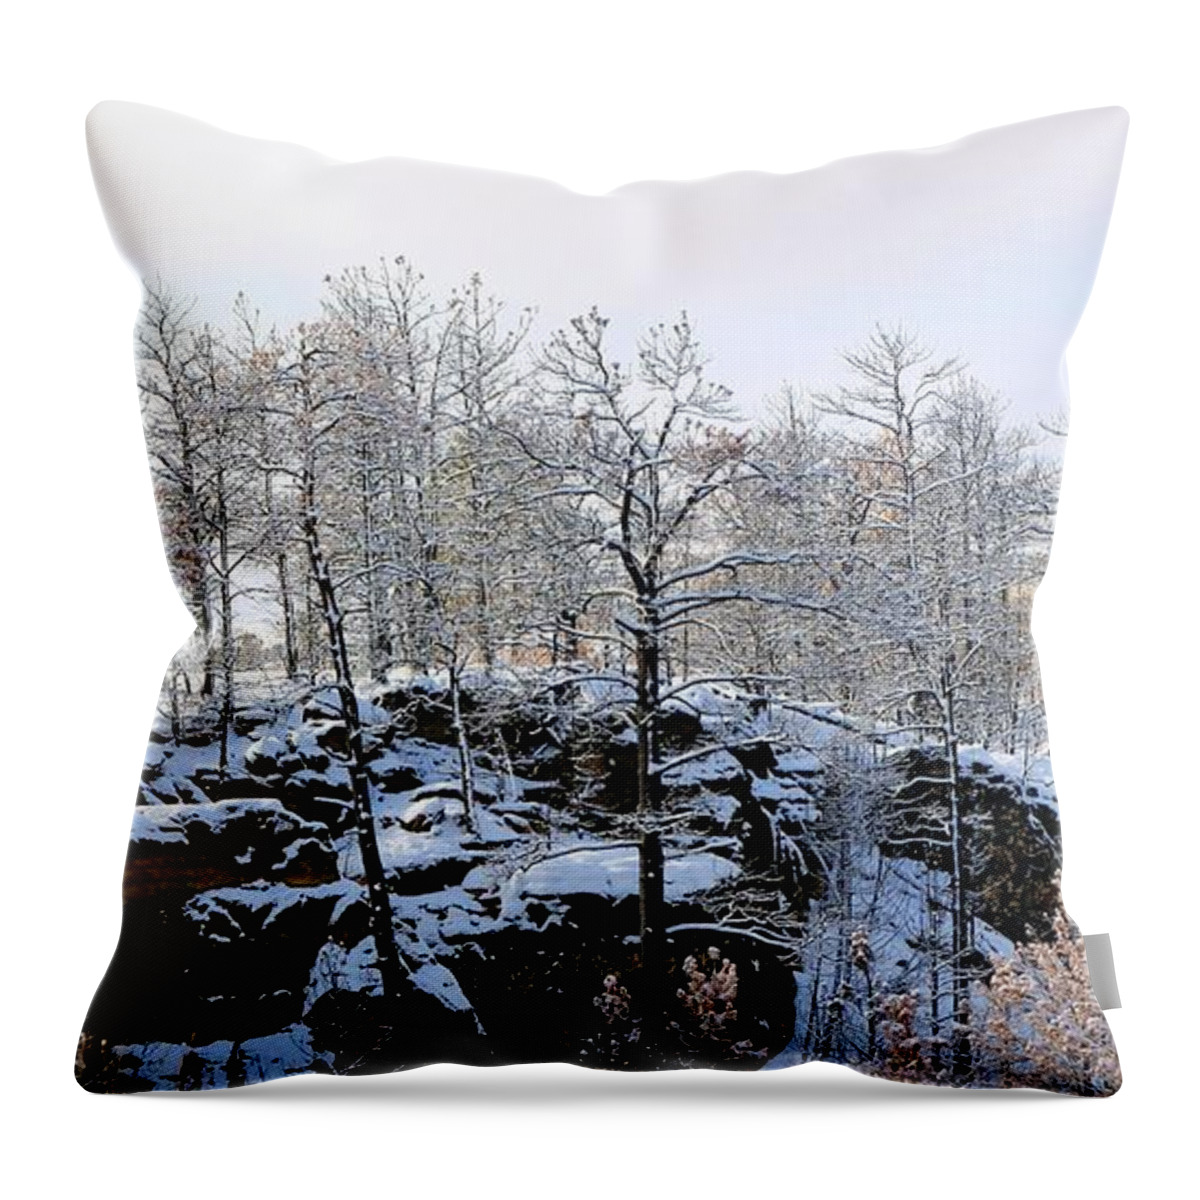 Black Hills Throw Pillow featuring the photograph After The Fire by Donald J Gray